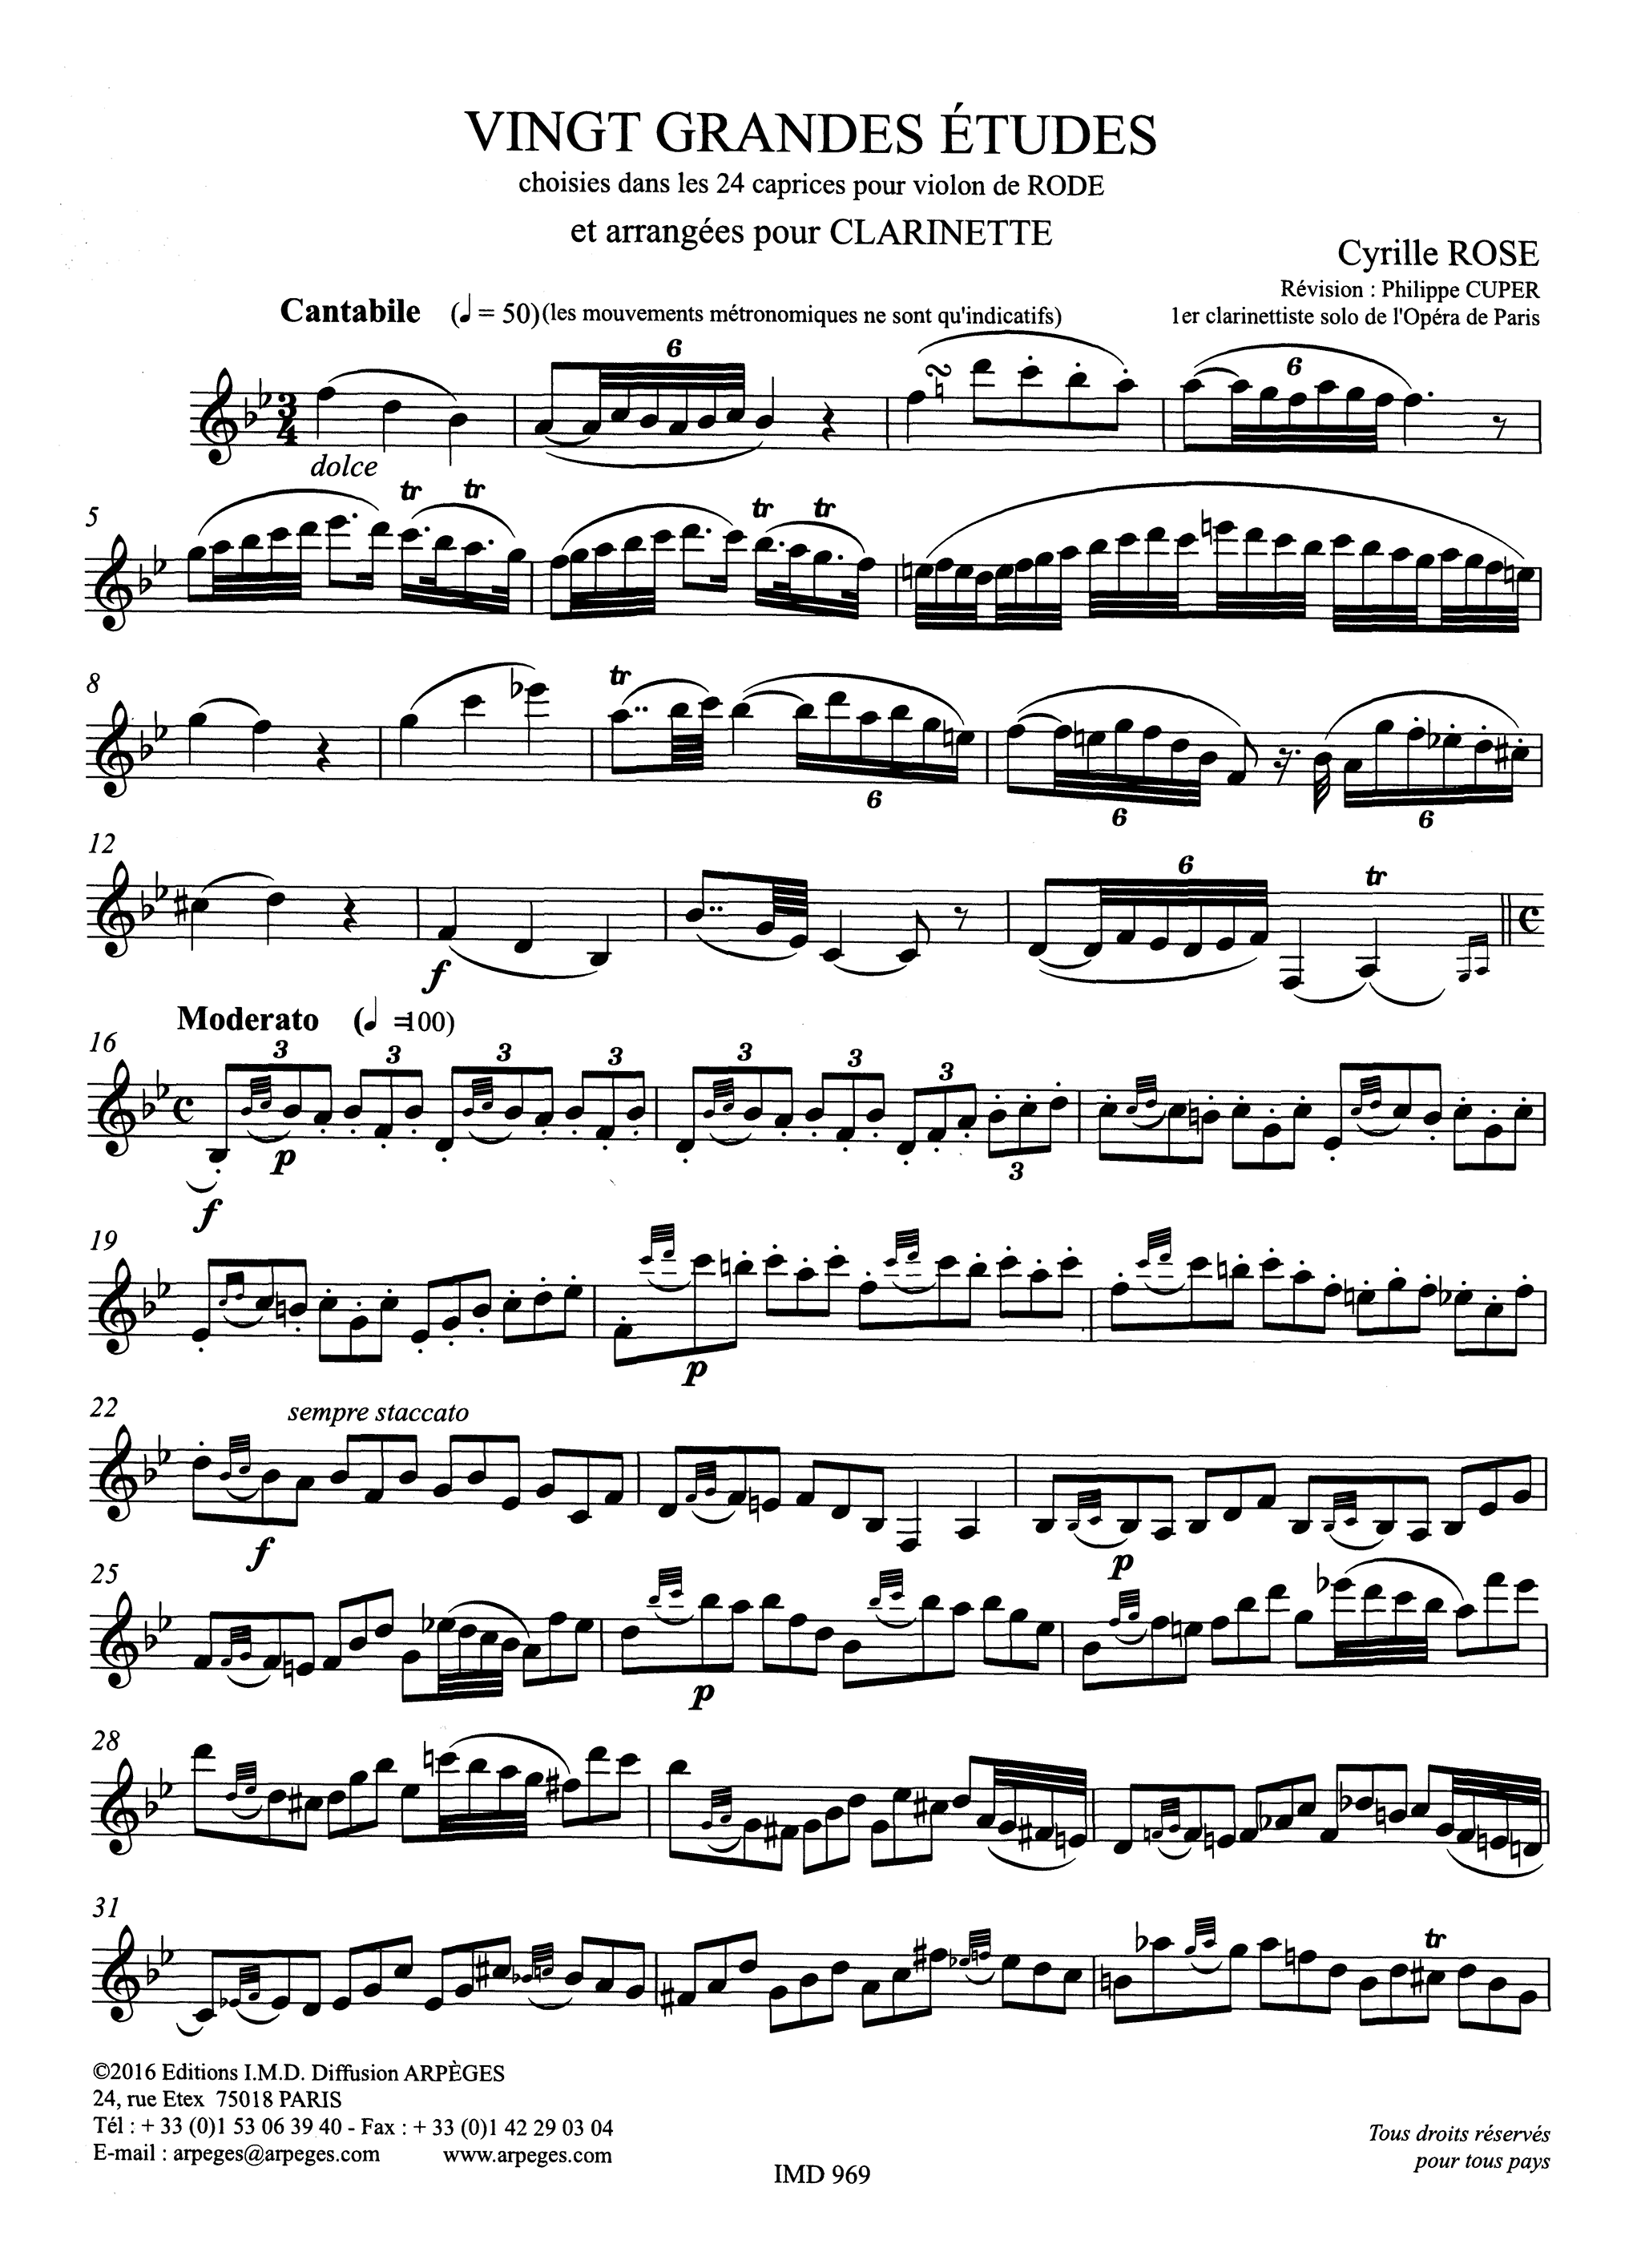 Rose 20 Great Études from Rode Page 2